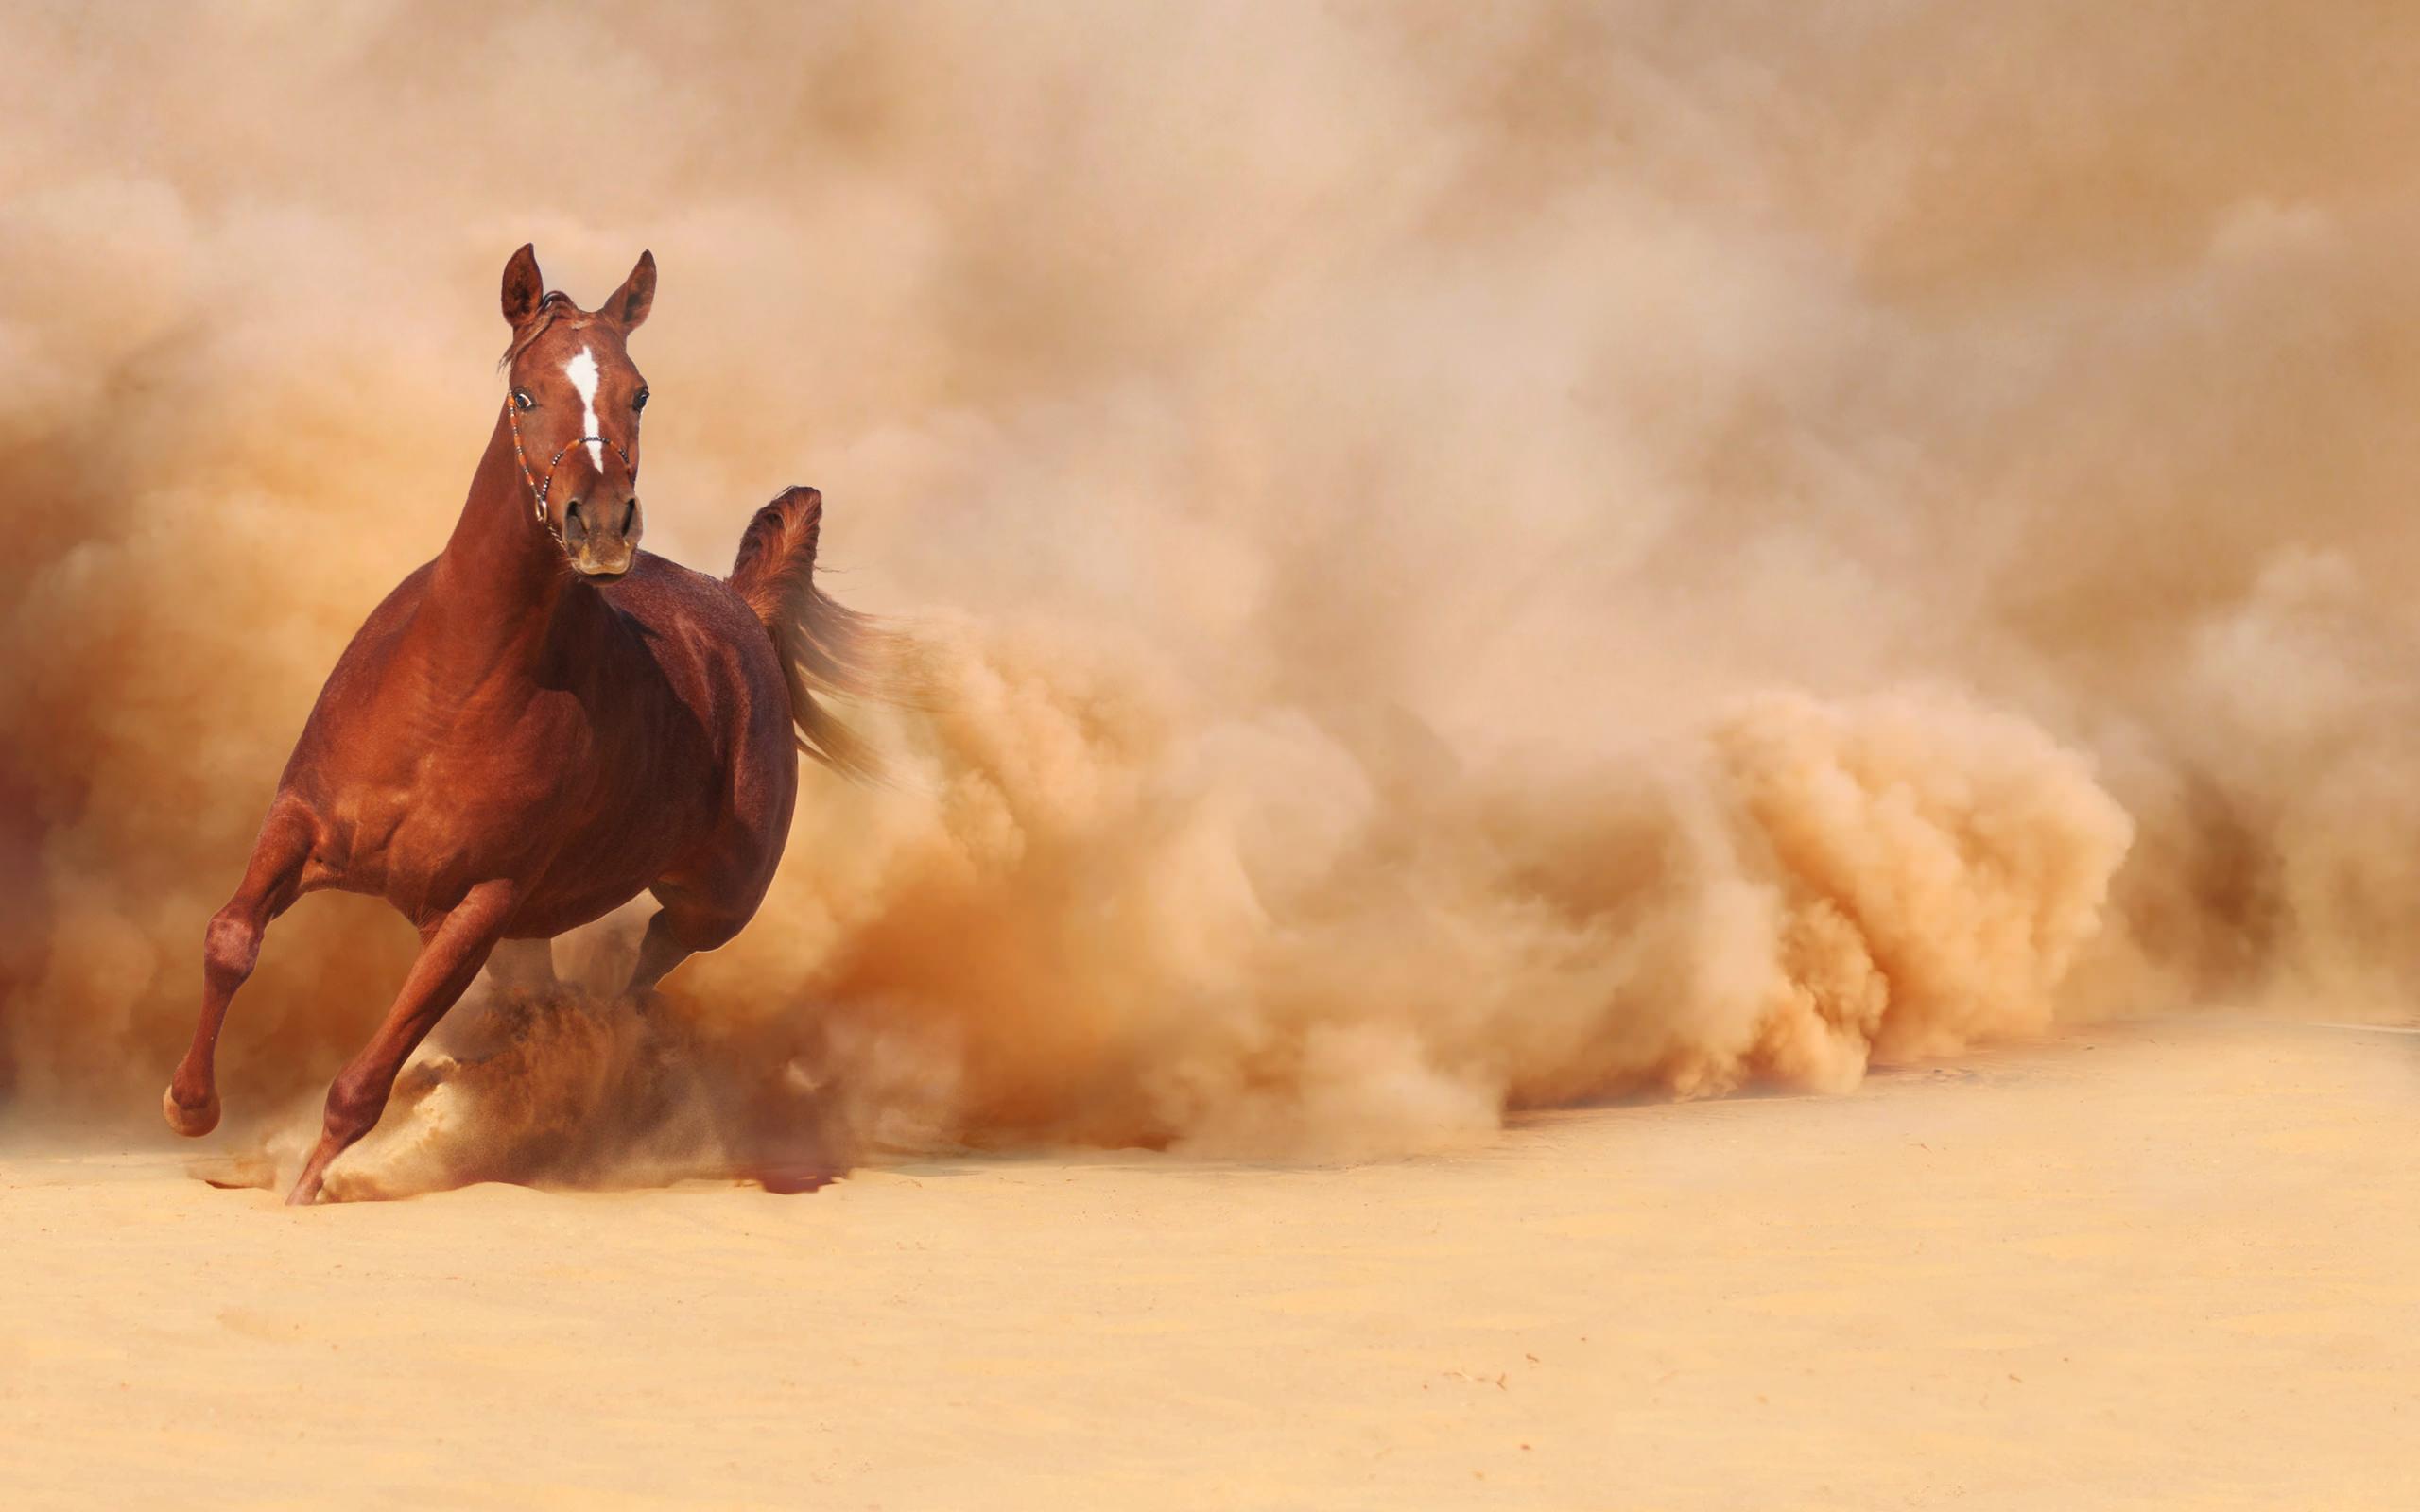 Picture Photo picture - a beautiful horse rushes 3